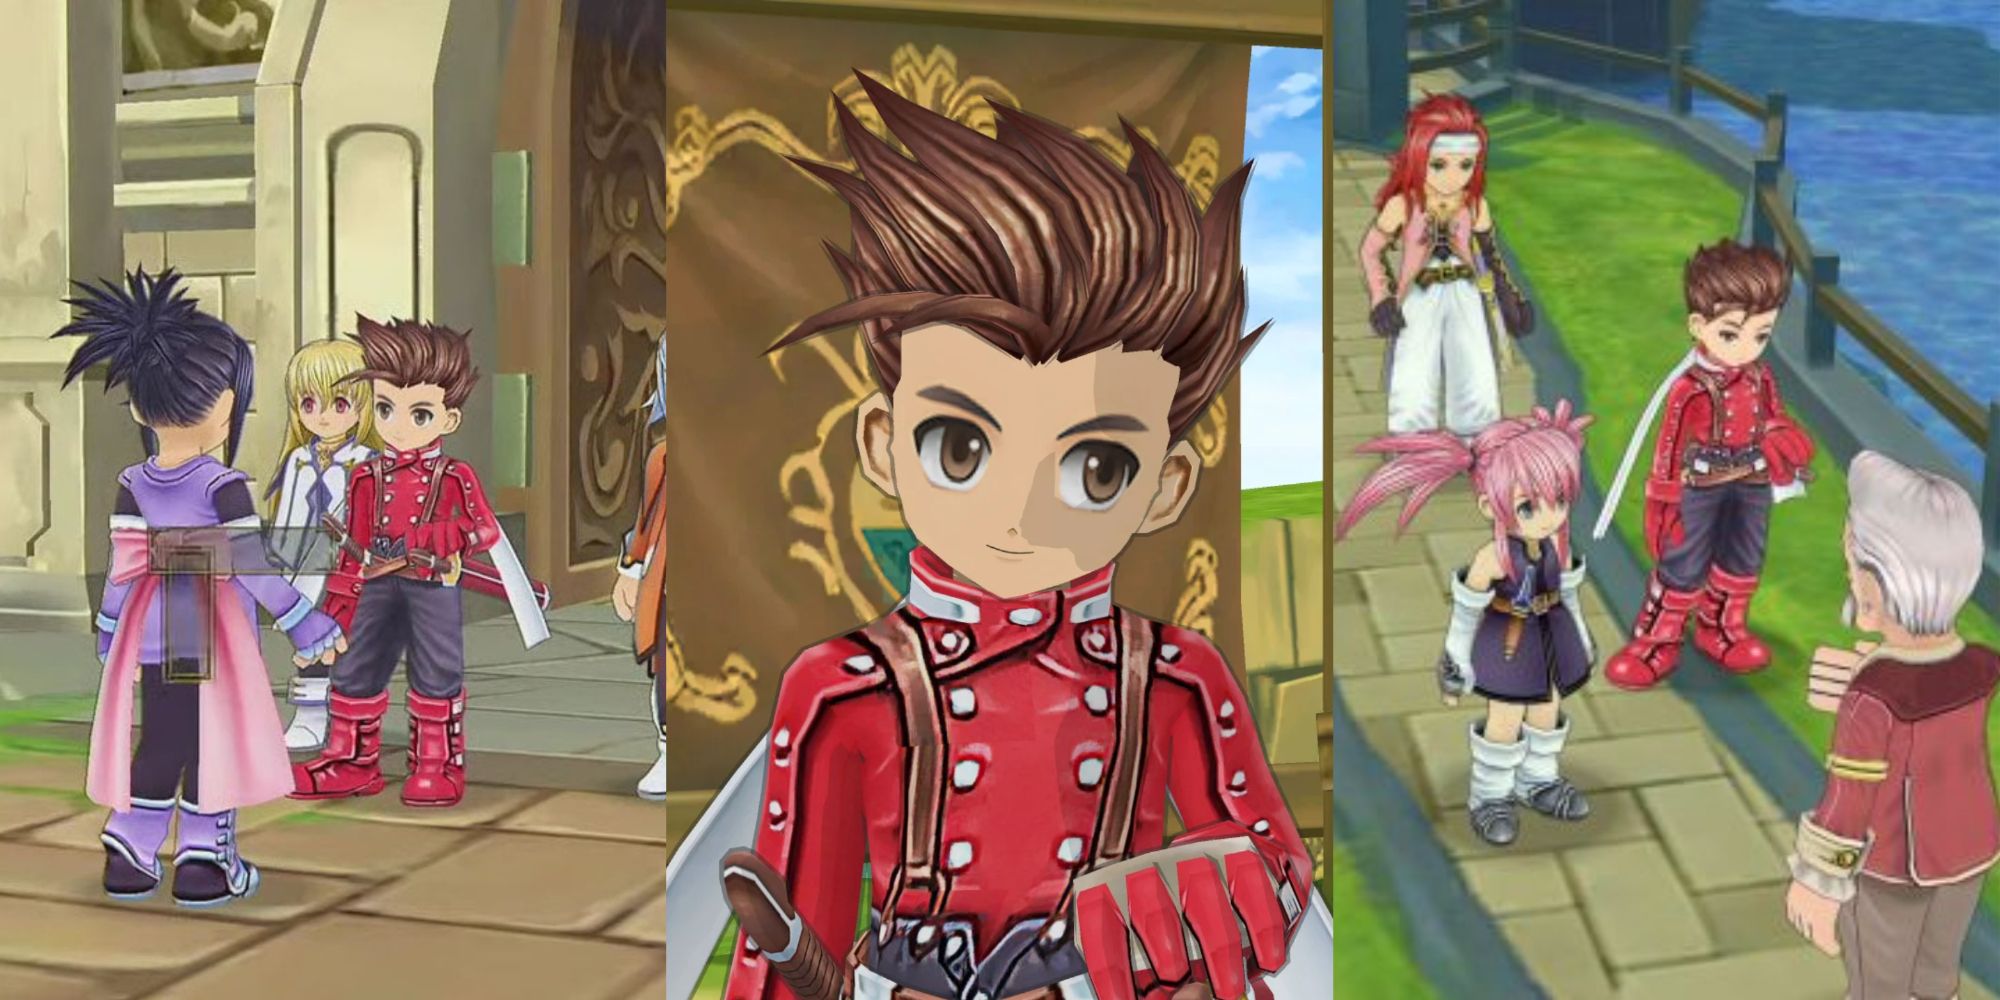 split image of Lloyd, confronting Sheena, and a butler